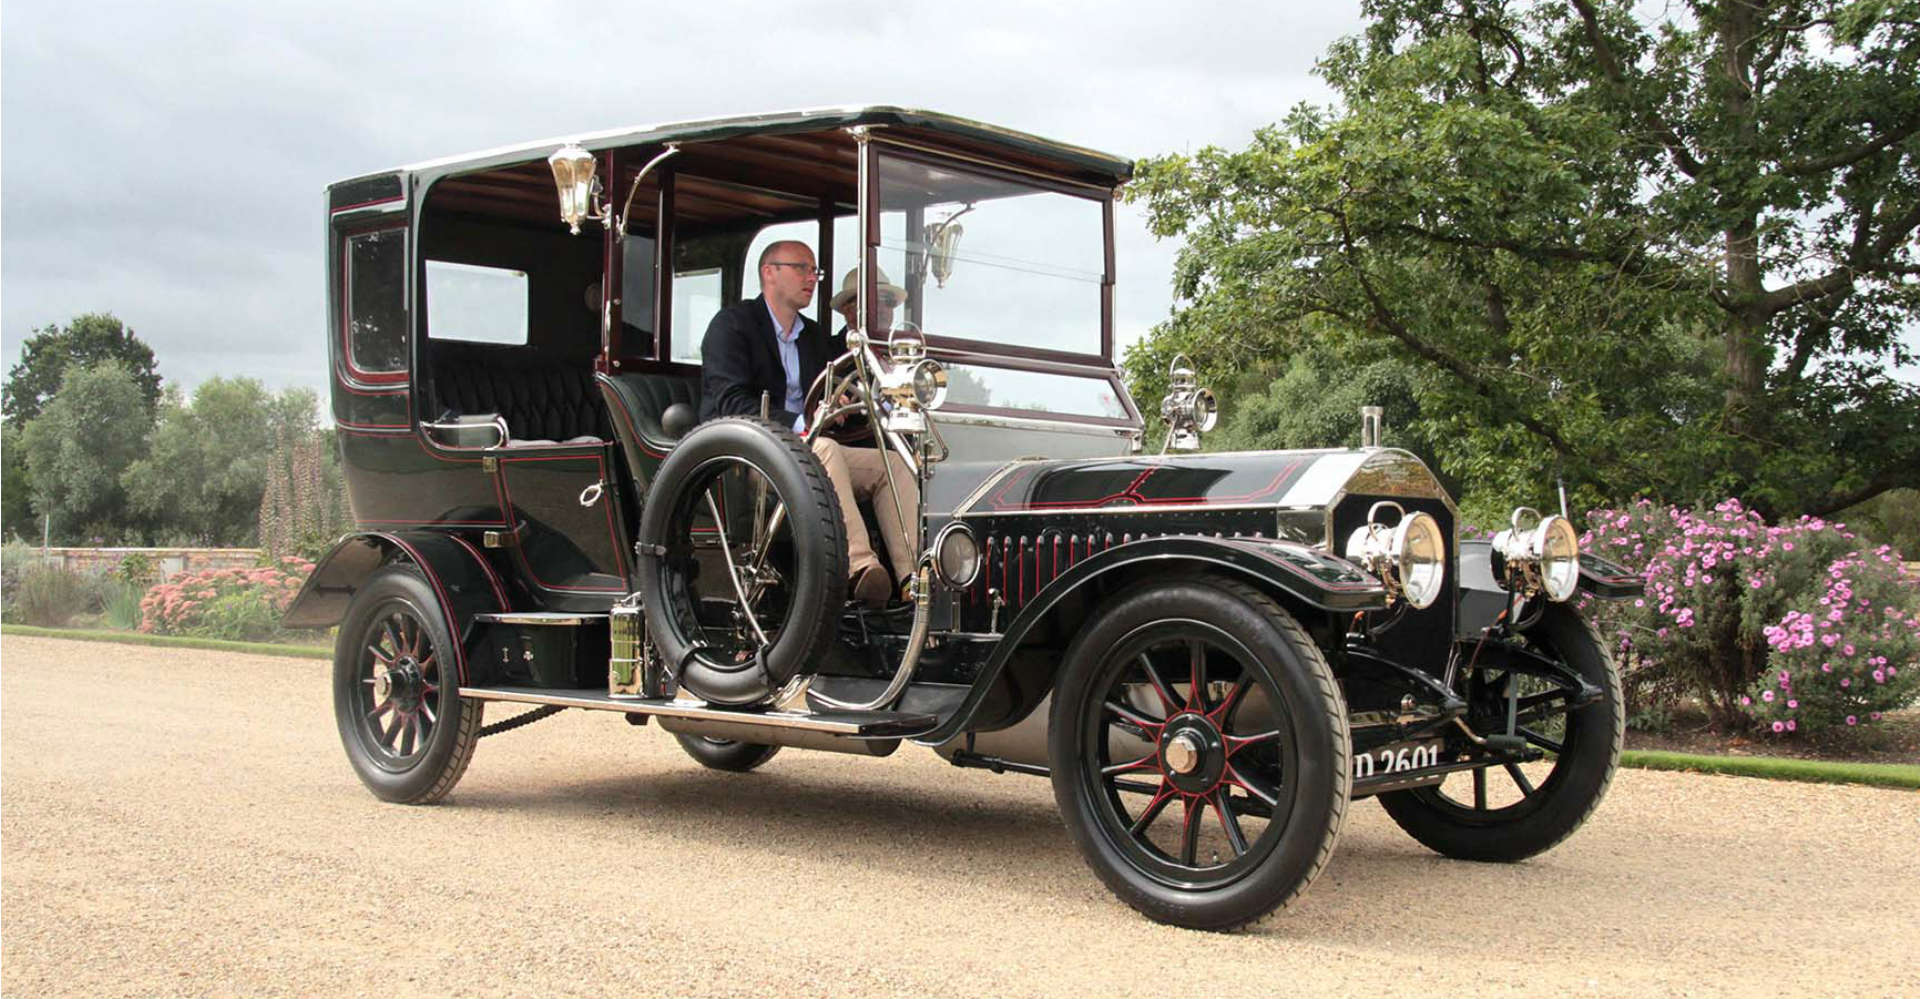 The Concours of Elegance at Hampton Court Palace 2019